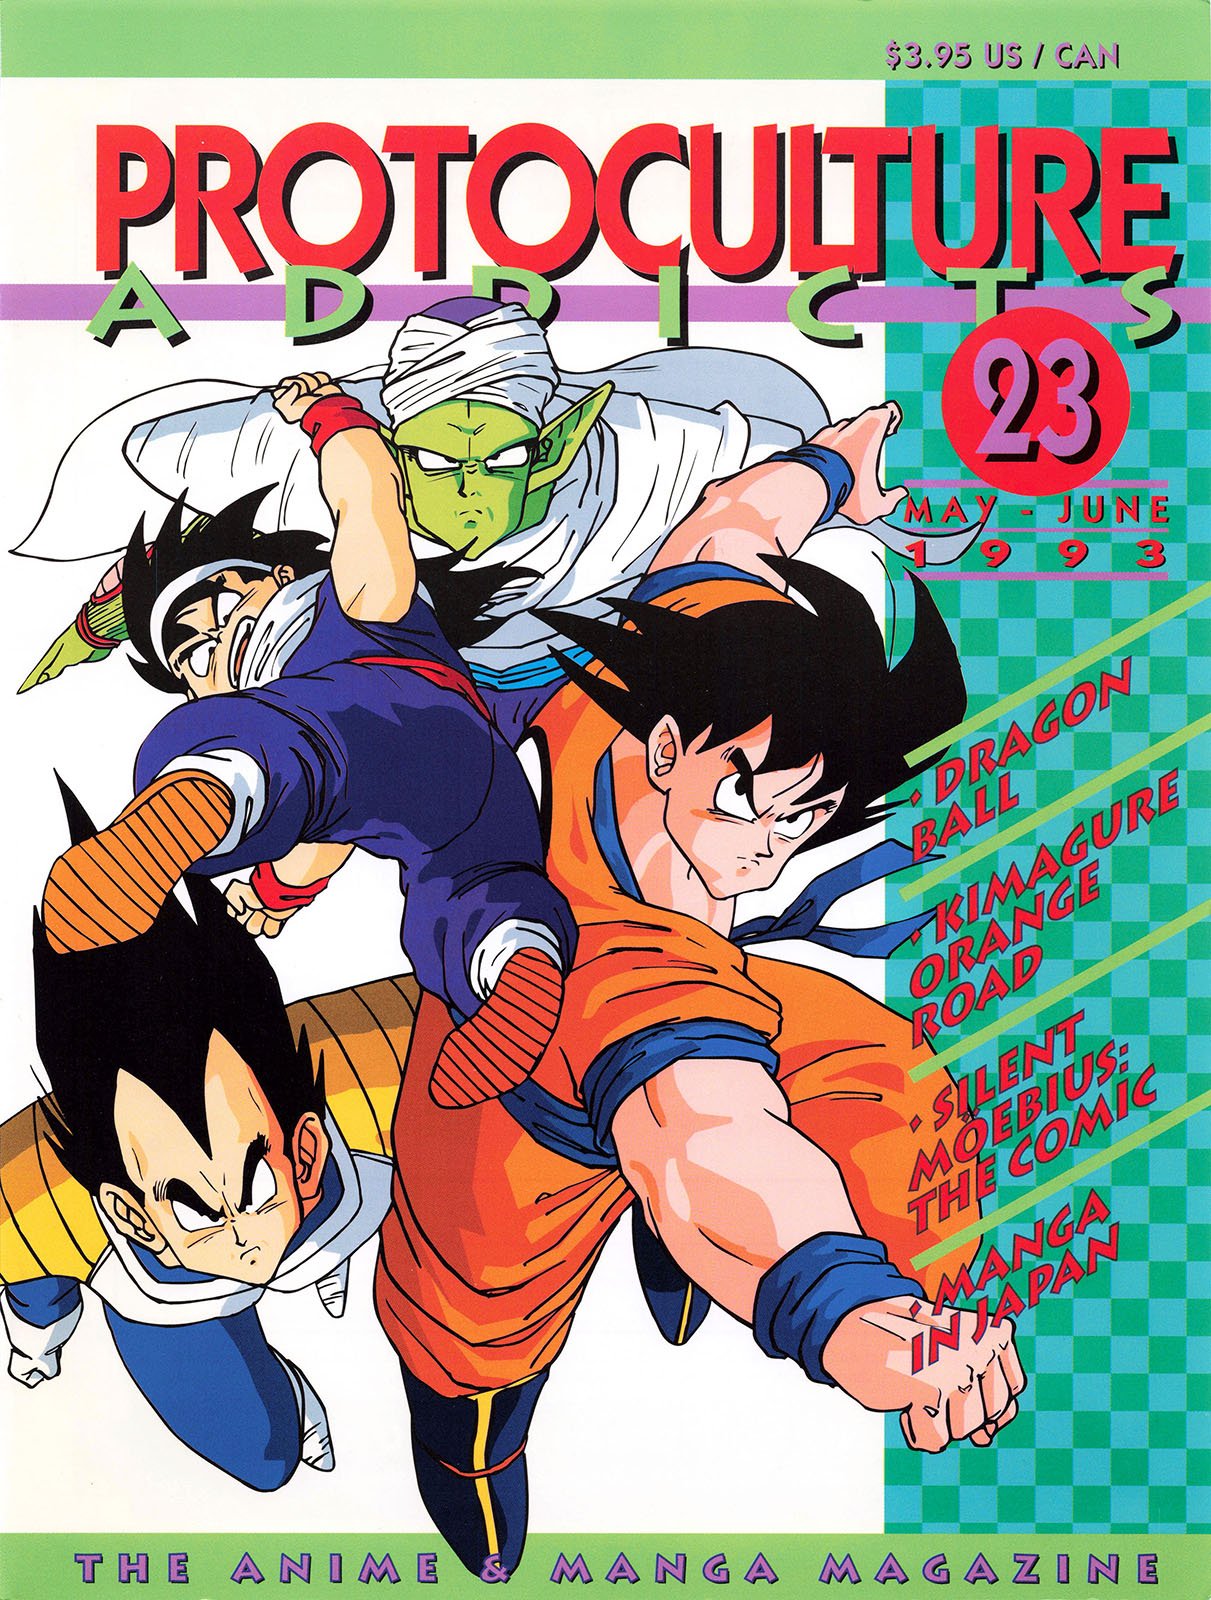 Protoculture Addicts 023 (May-June 1993)